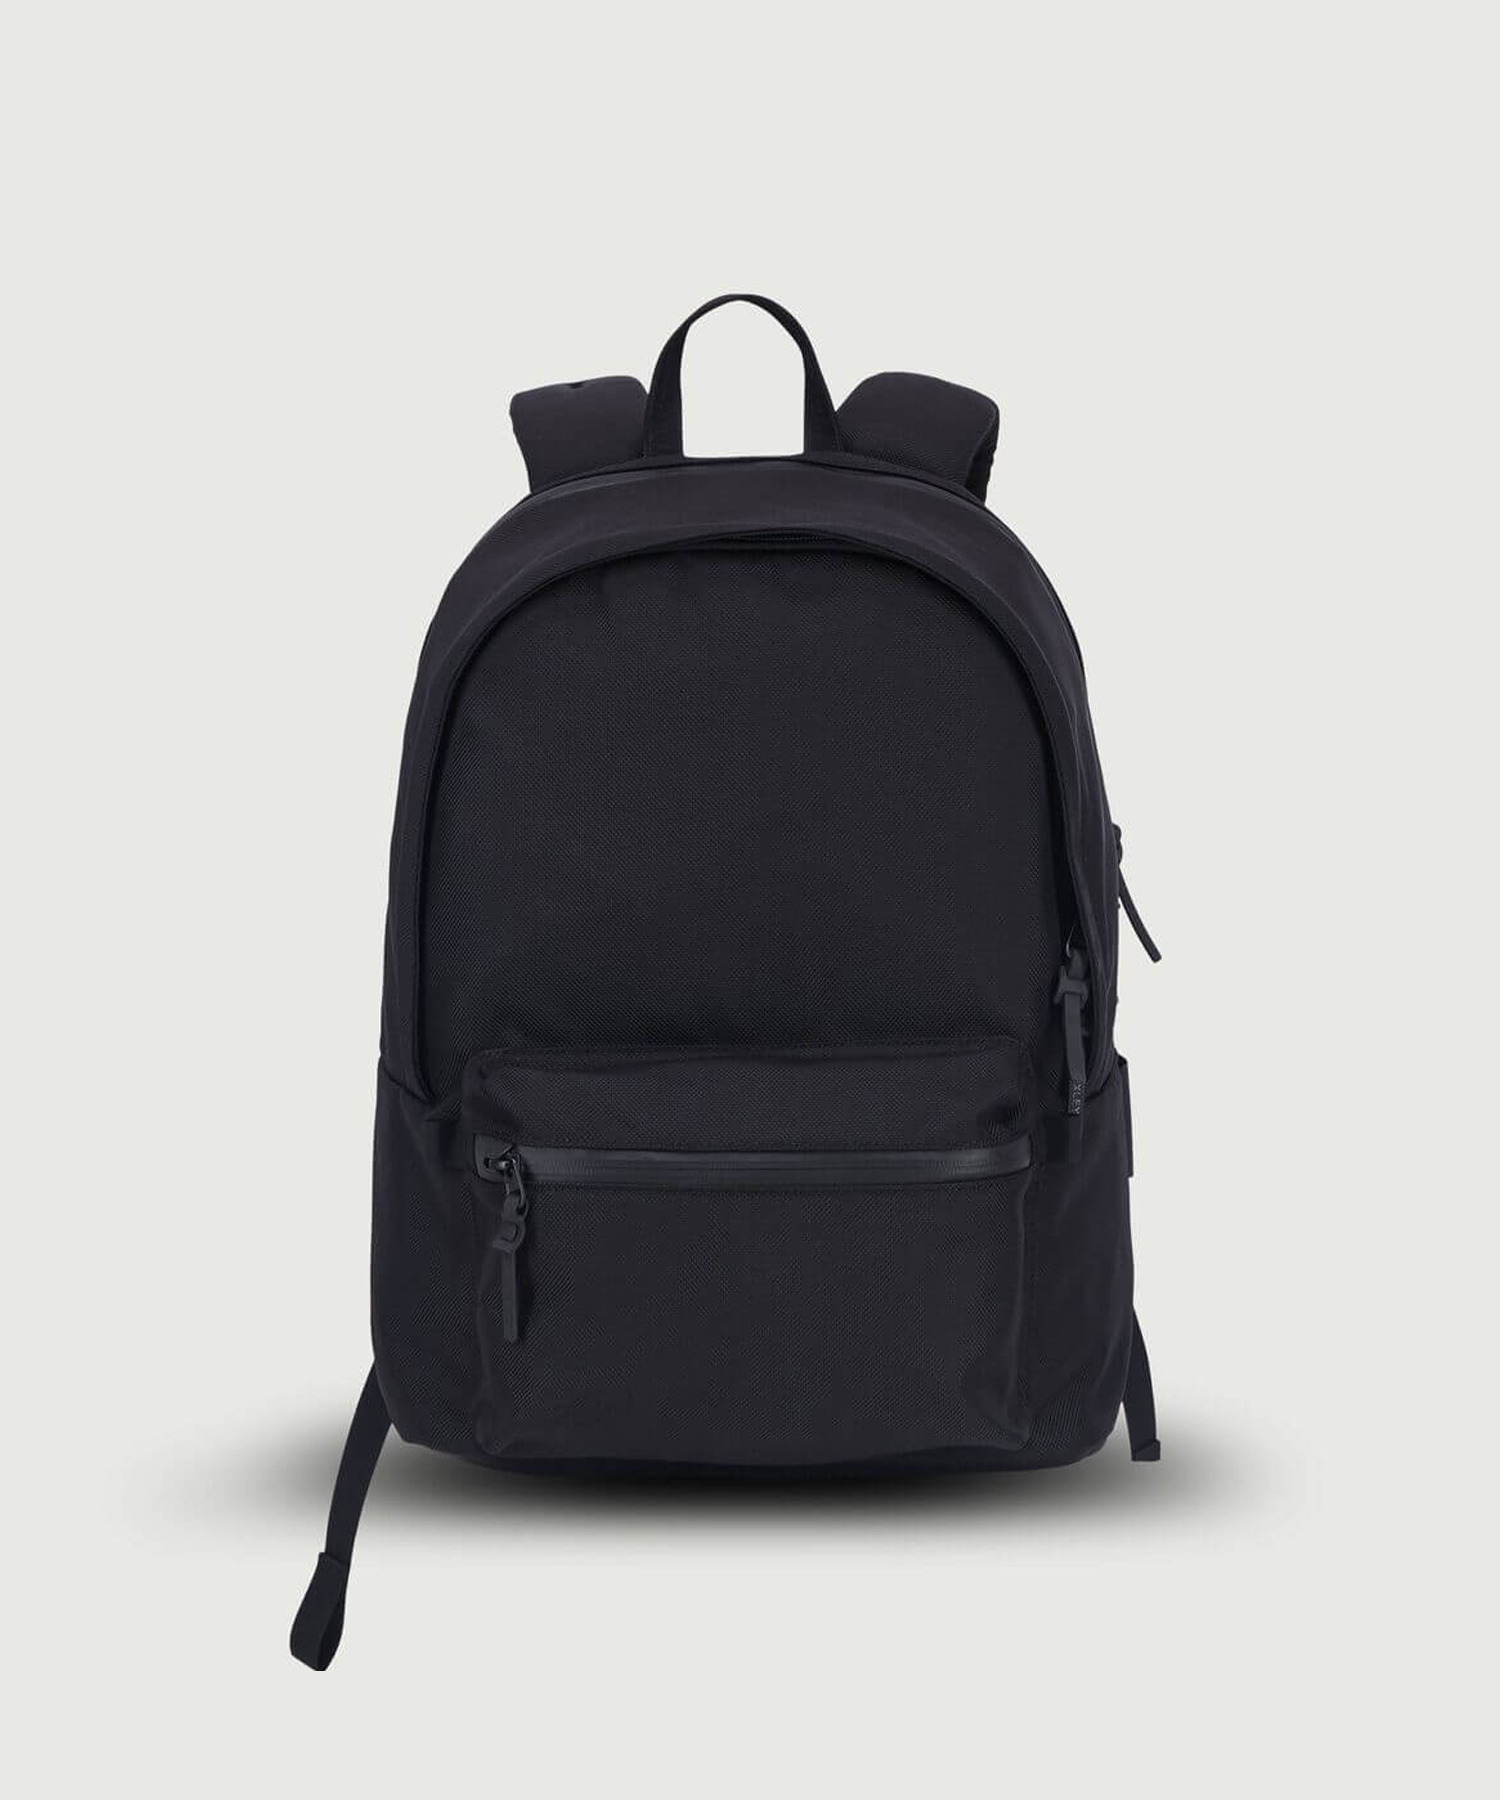 WEXLEY / CLASSIC DAYPACK